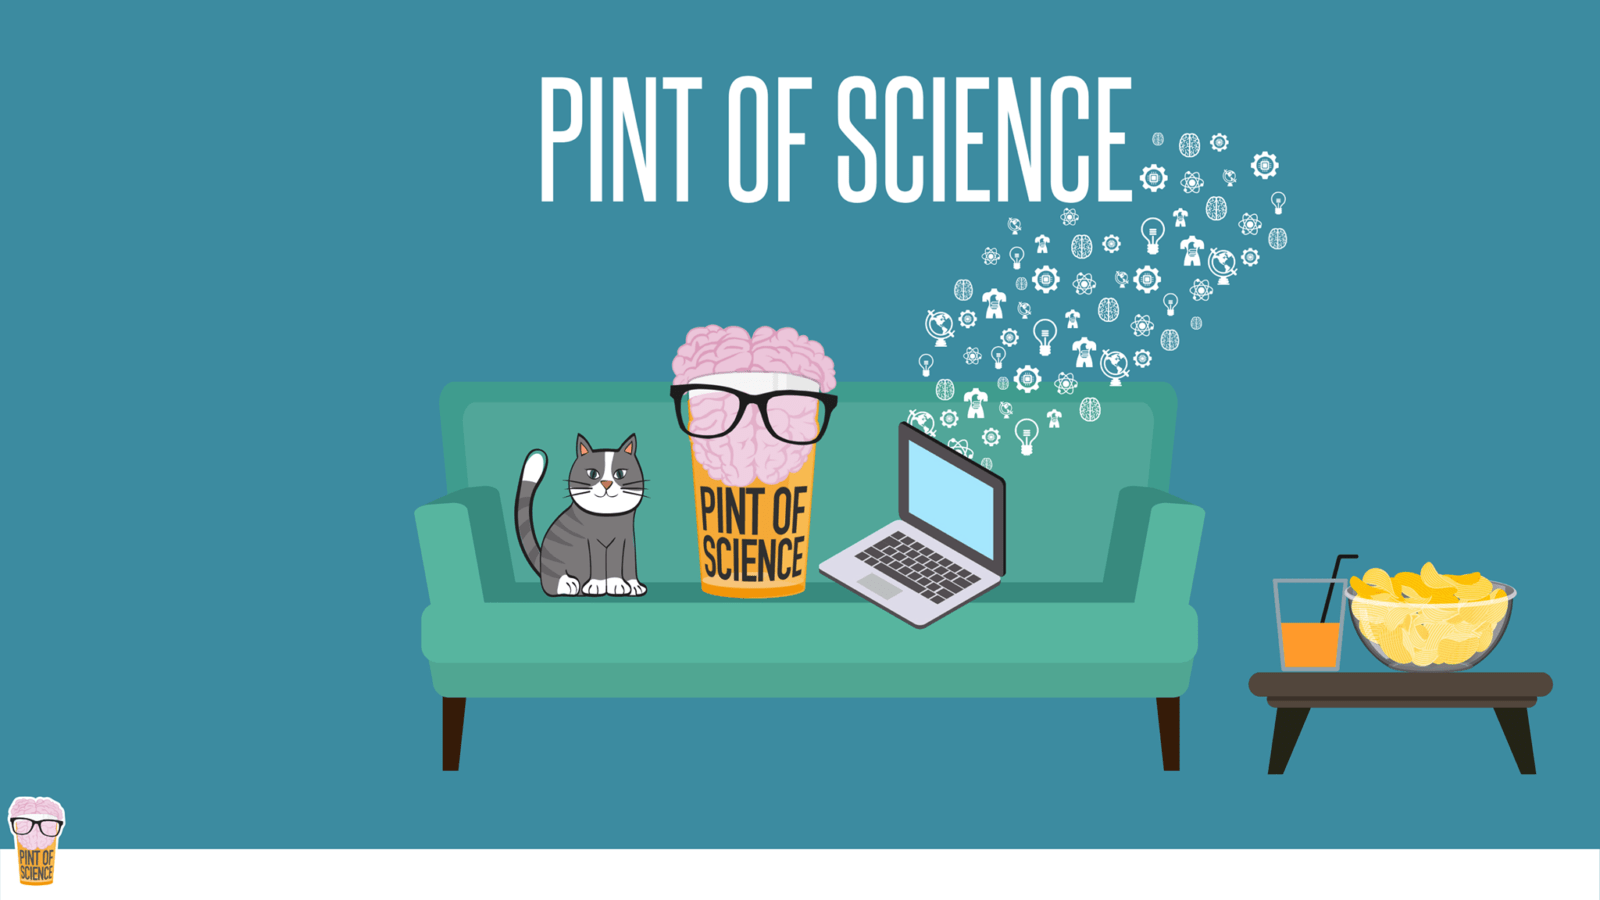 Pint of Science a Torino